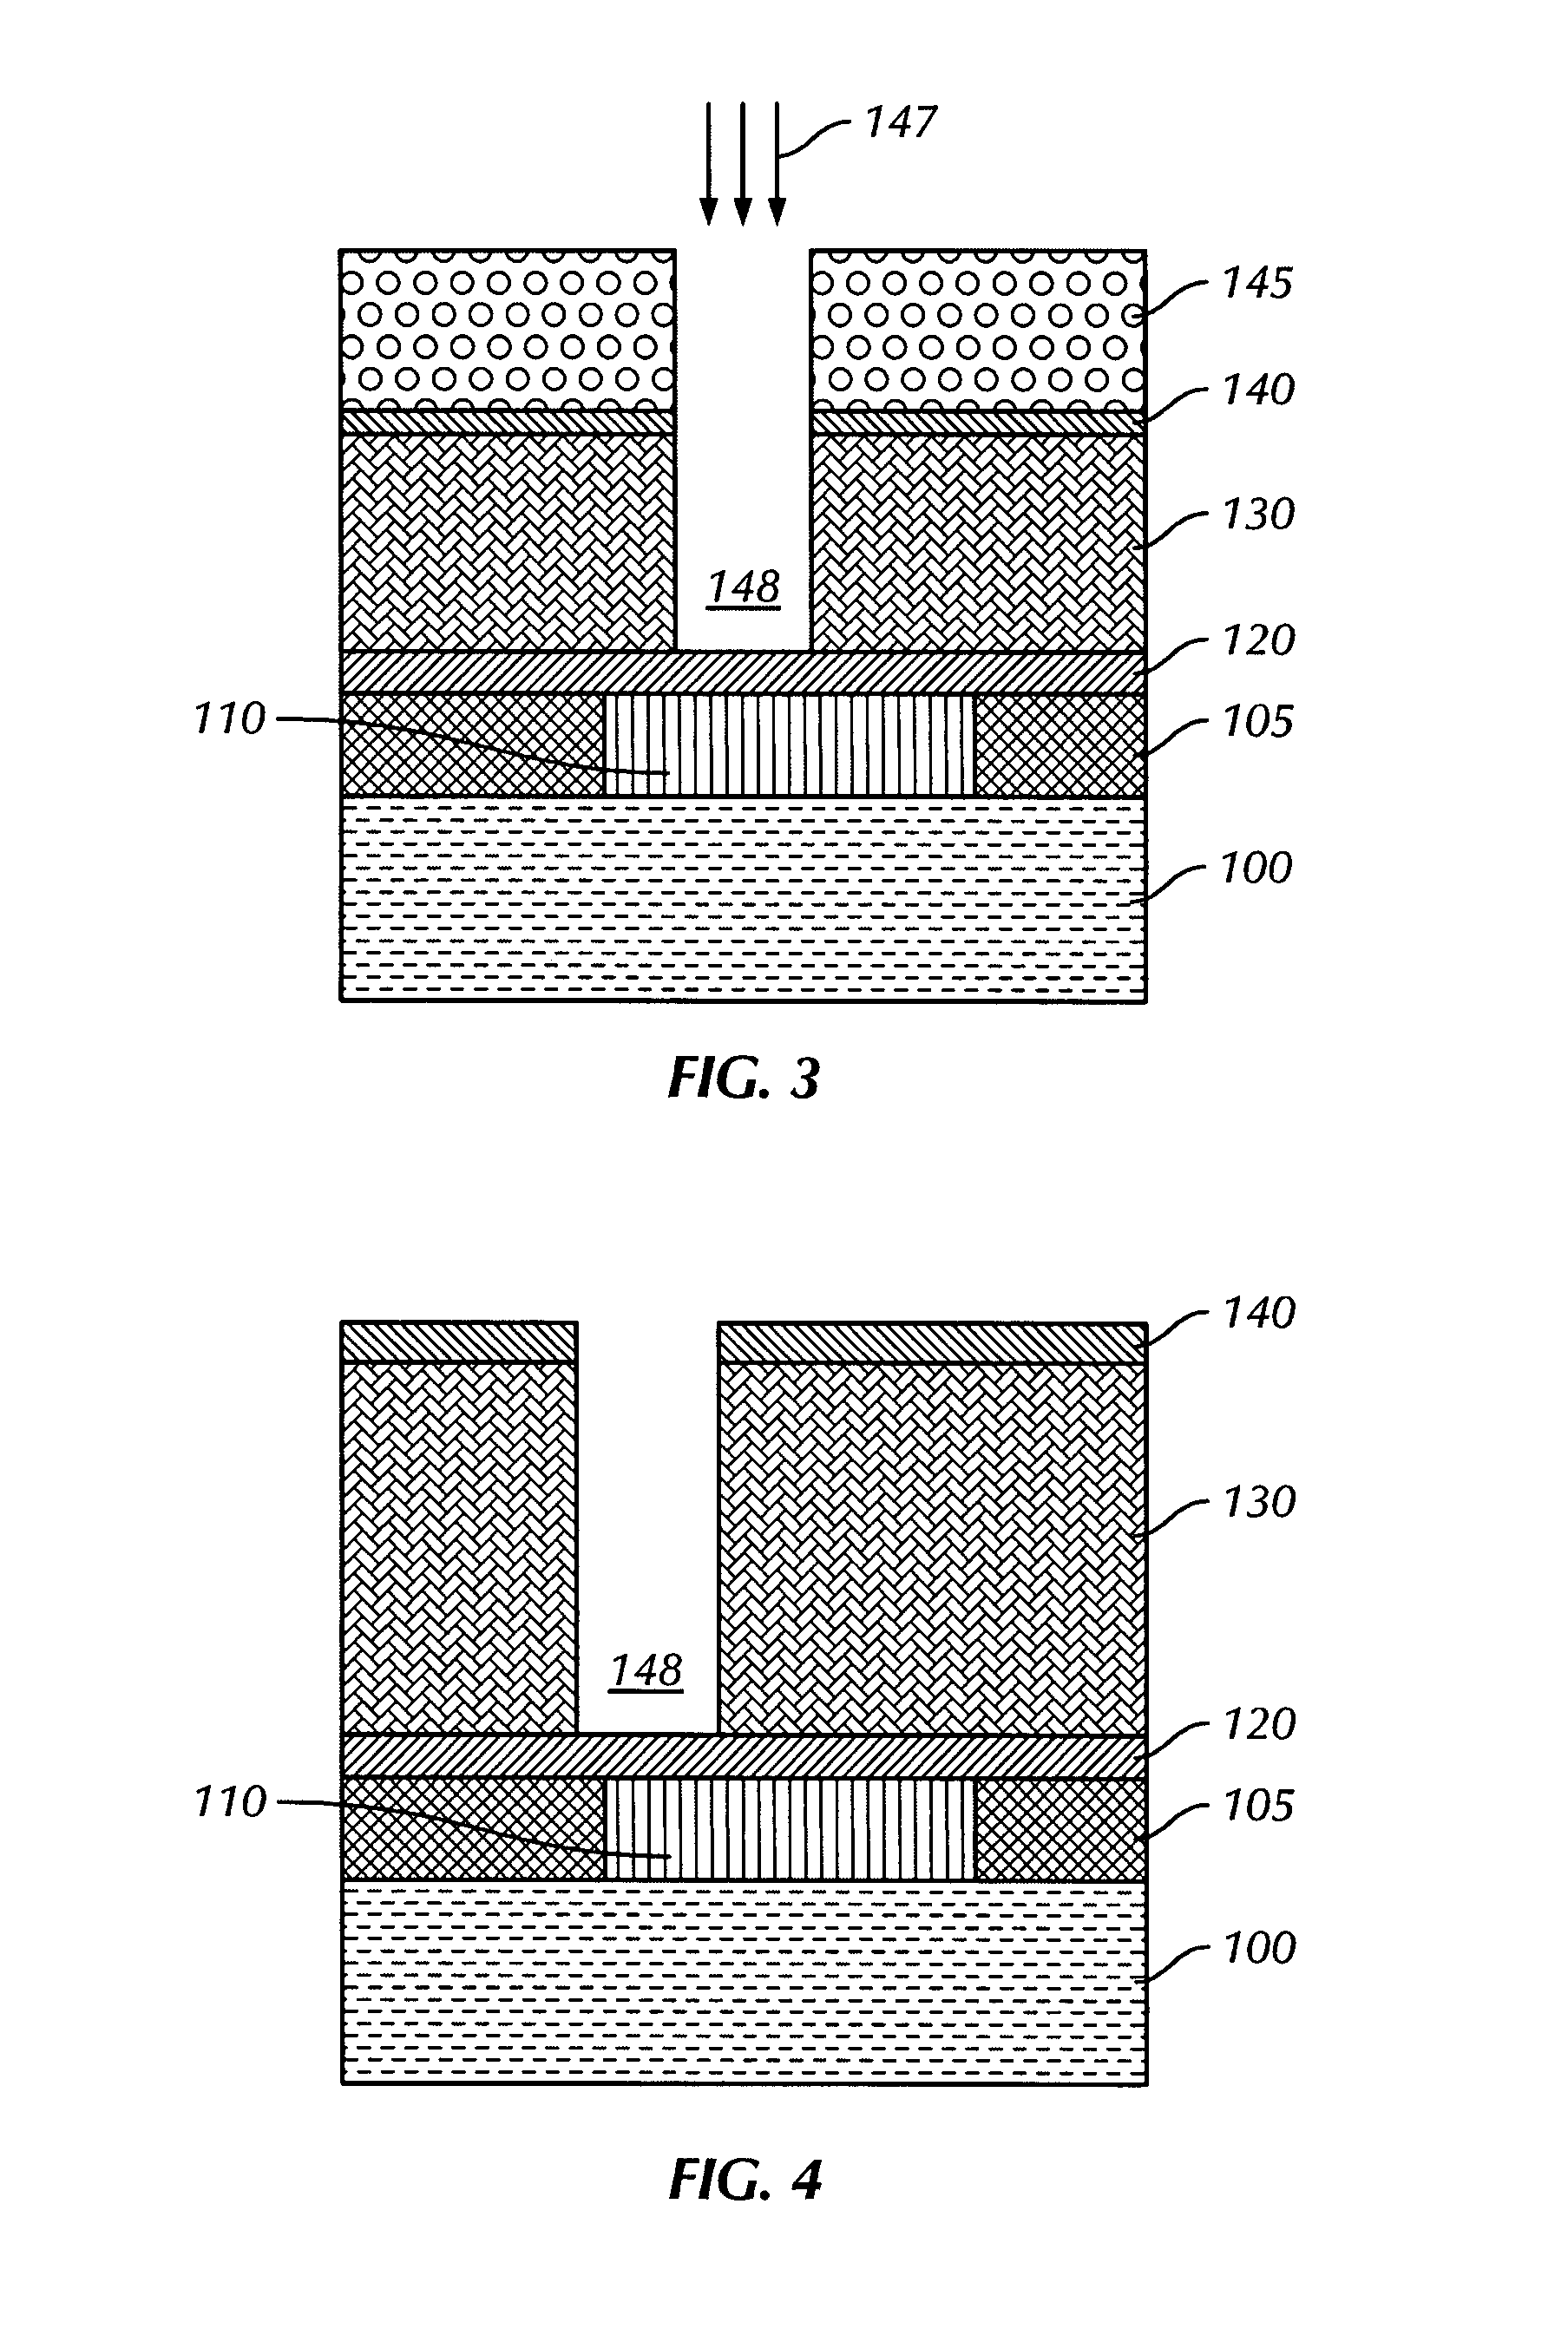 Cobalt tungsten phosphate used to fill voids arising in a copper metallization process